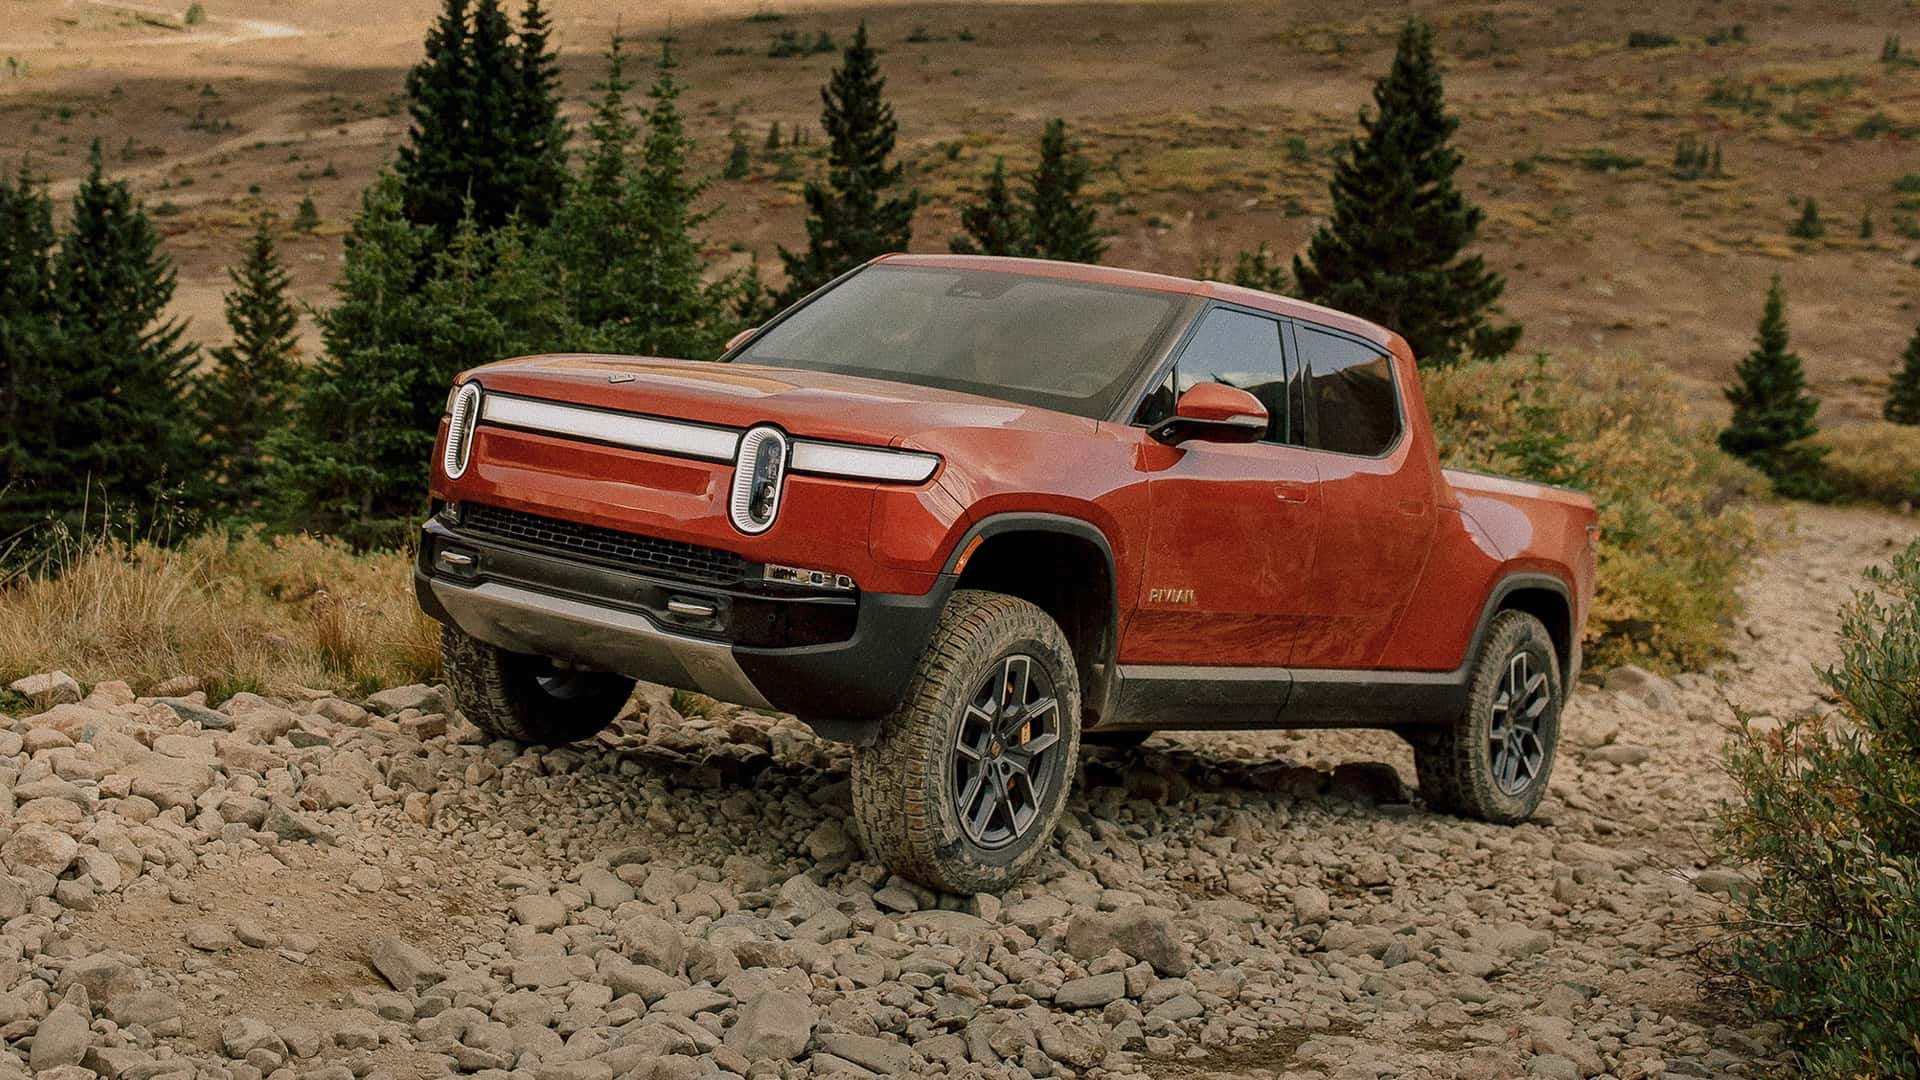 buying an ice vehicle is “like building a horse barn in 1910”: rivian ceo